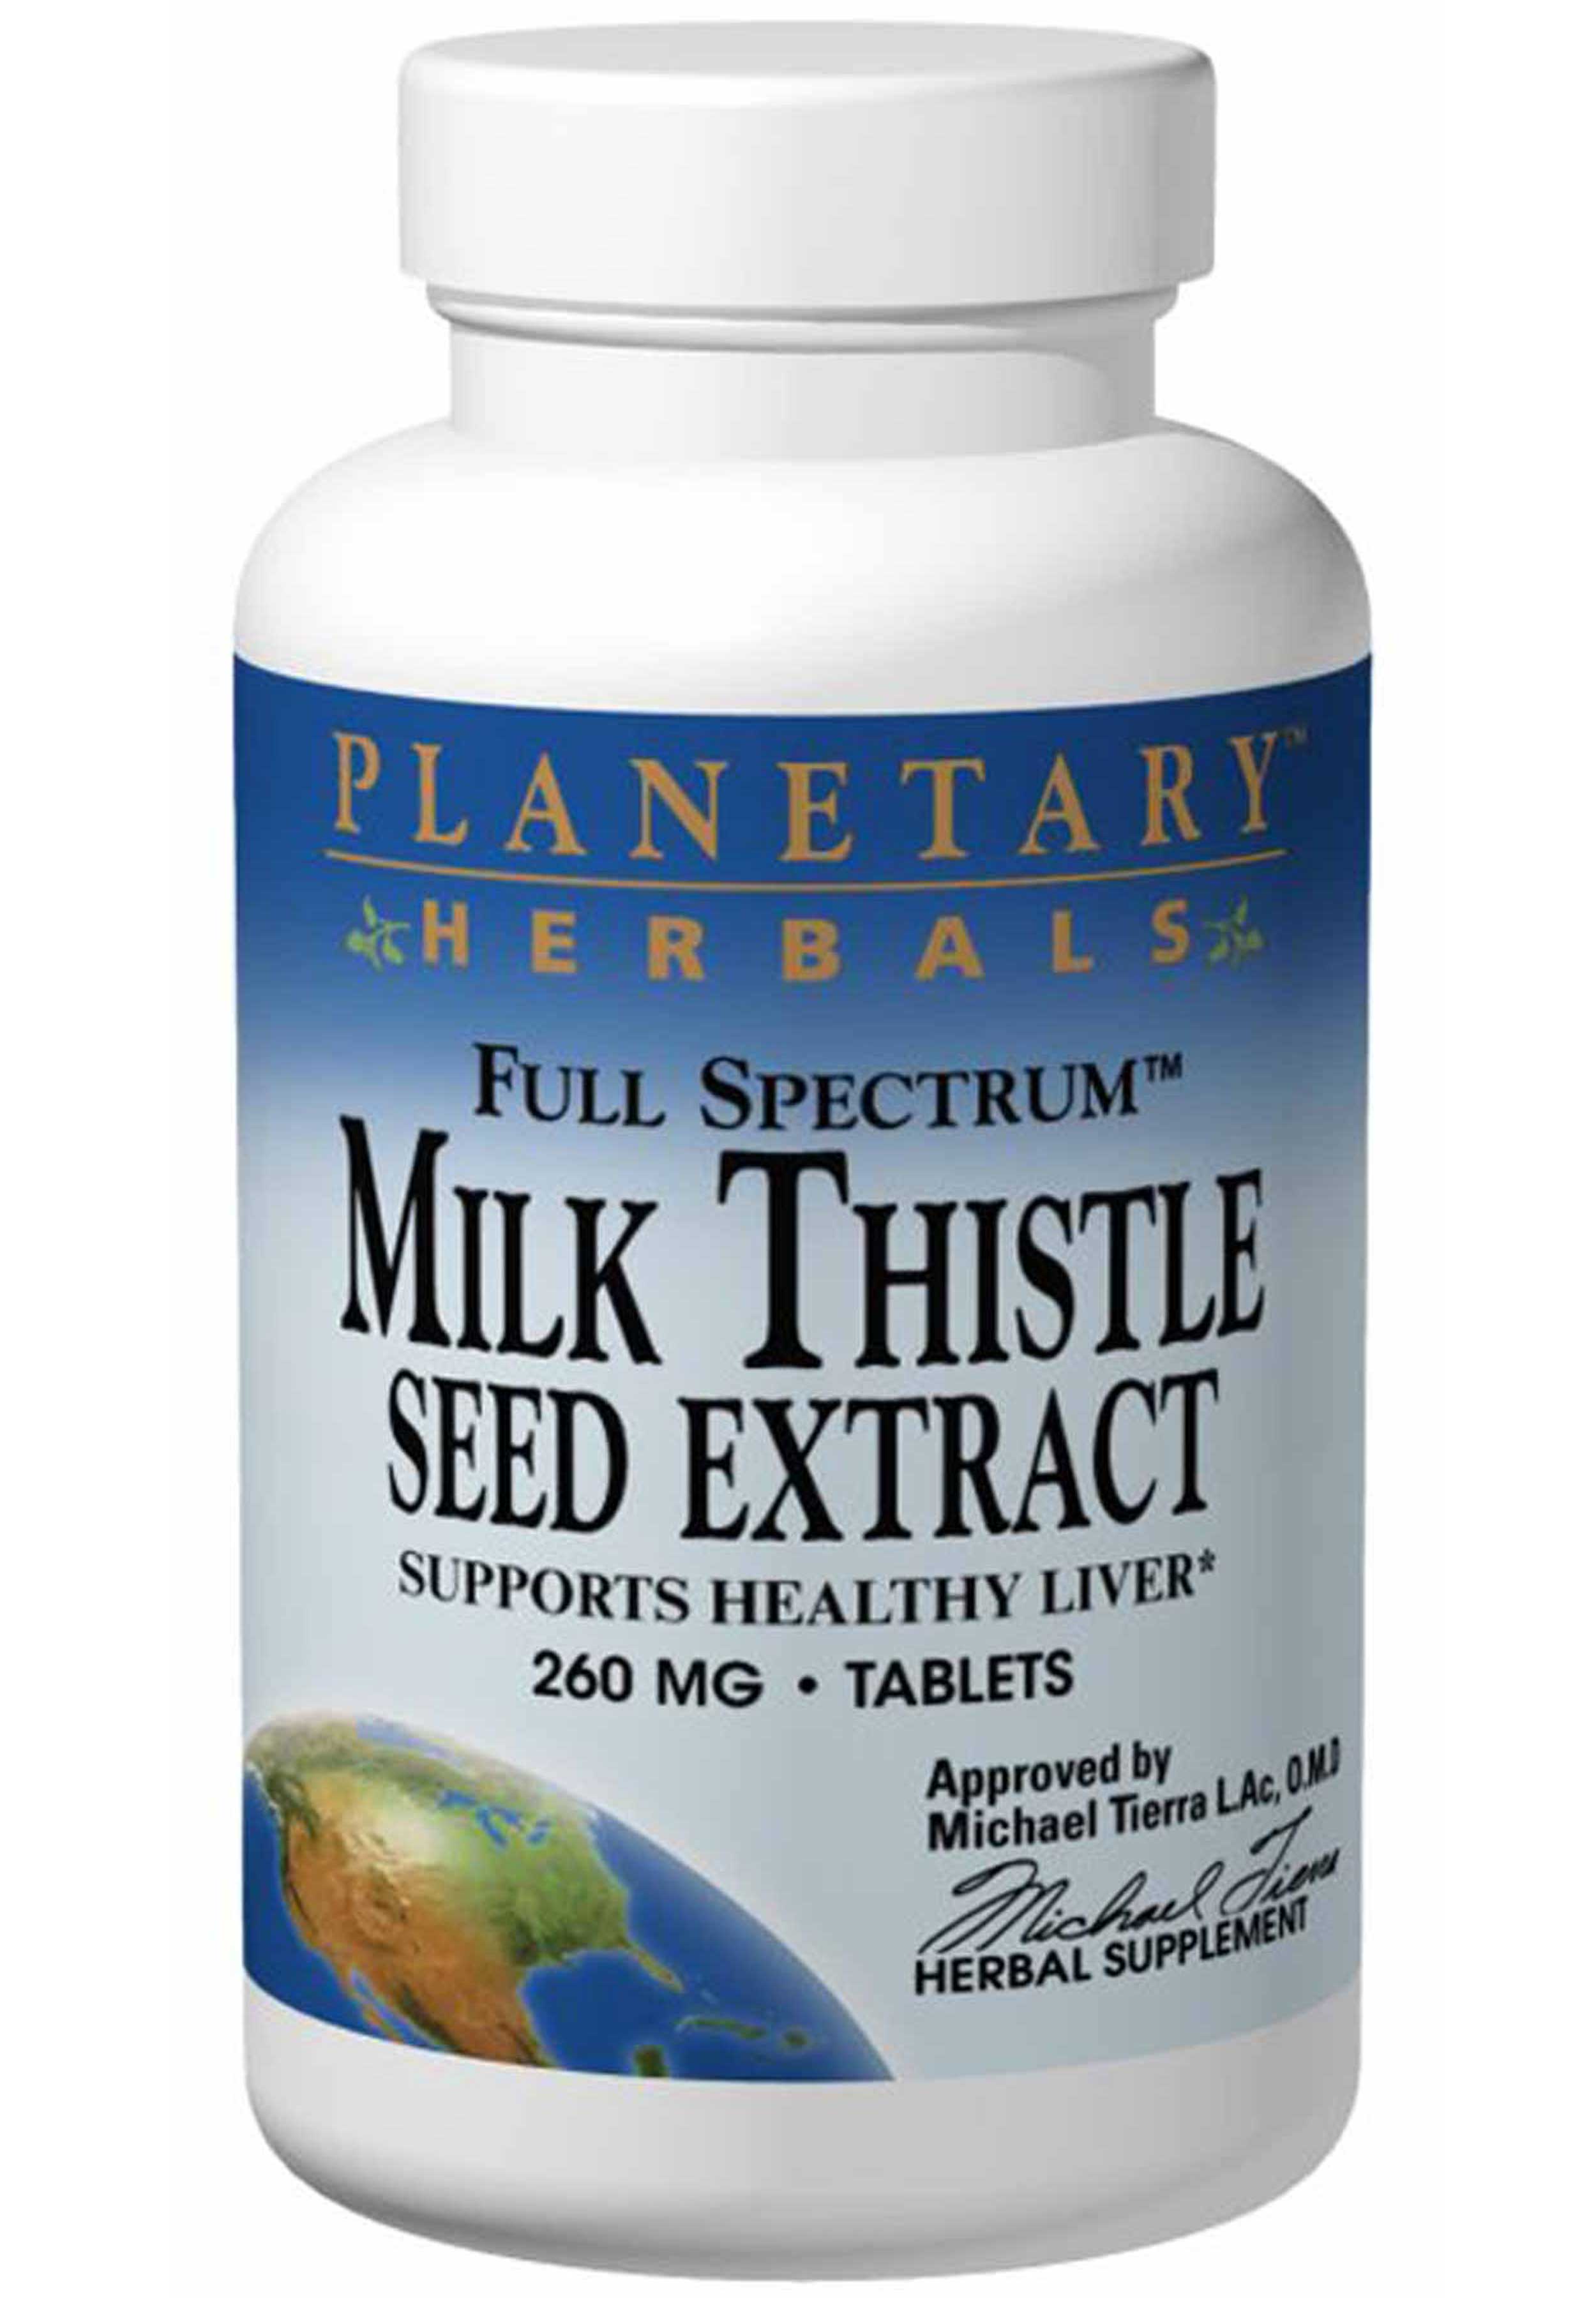 Planetary Herbals Milk Thistle Seed Extract